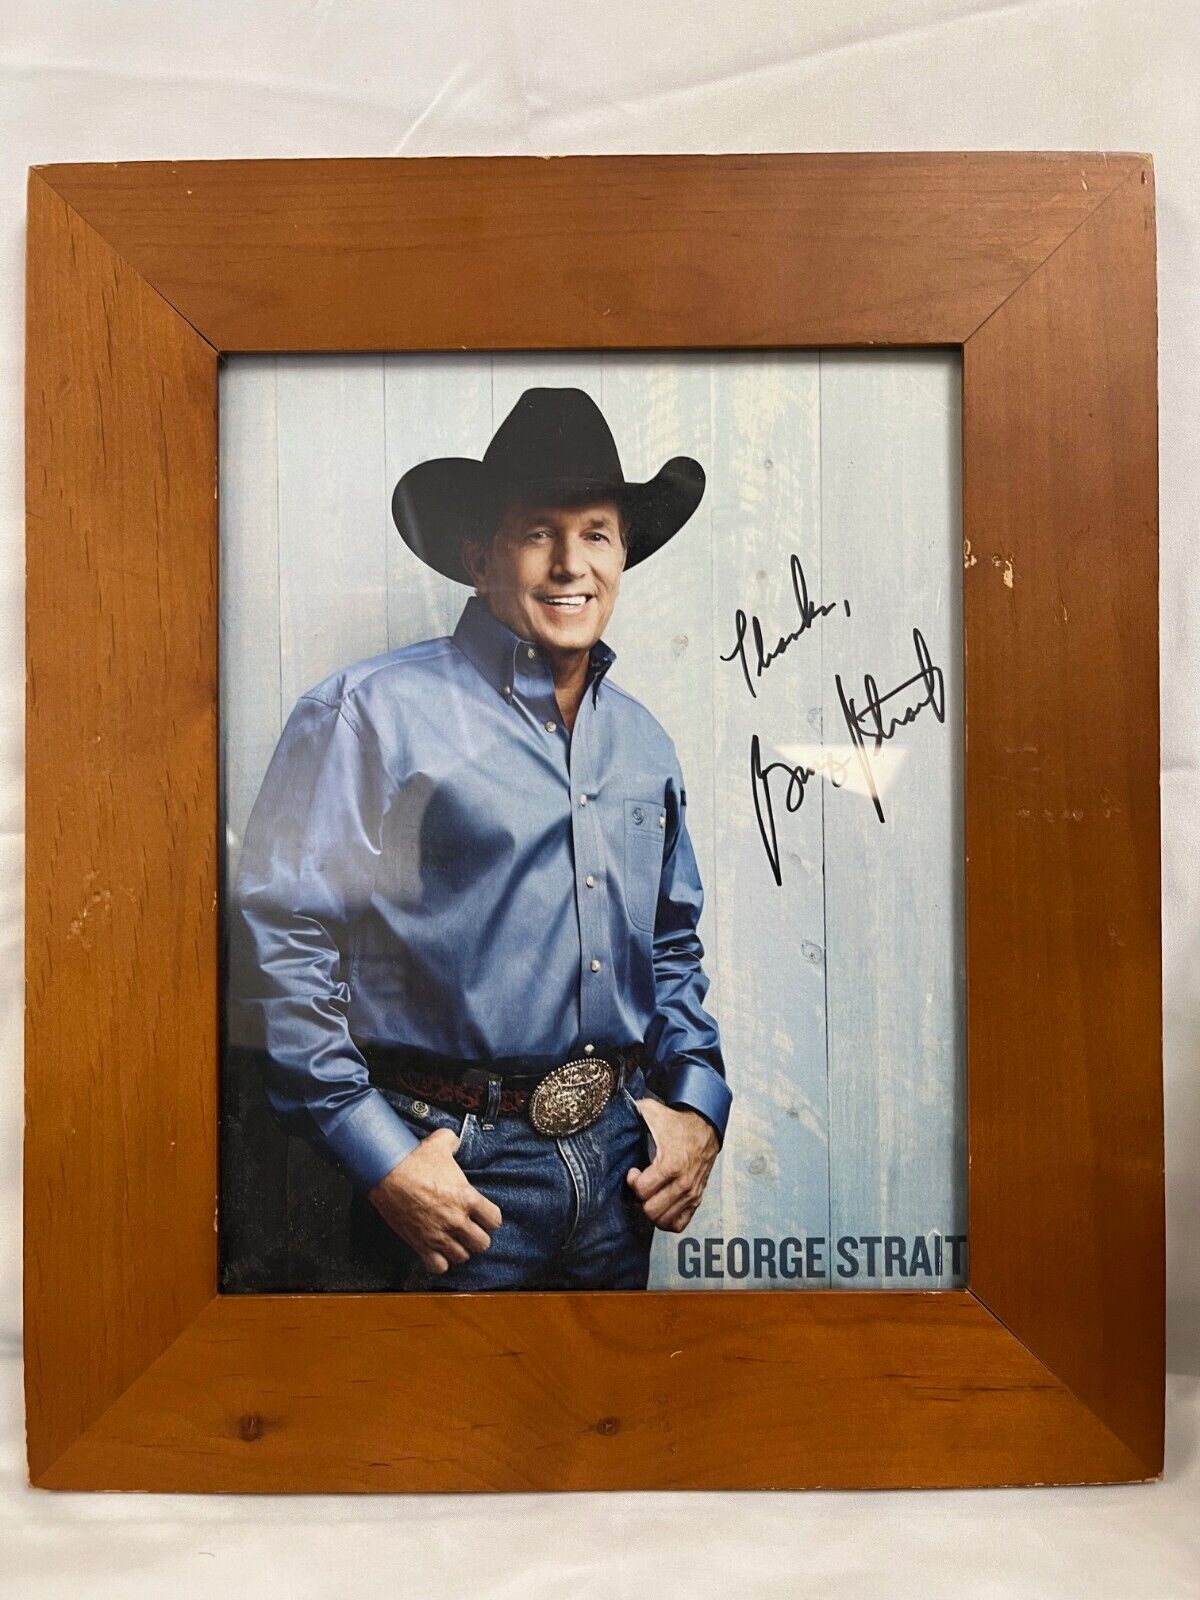 GEORGE STRAIT HAND SIGNED 8x10 COLOR PHOTO   KING OF COUNTRY MUSIC